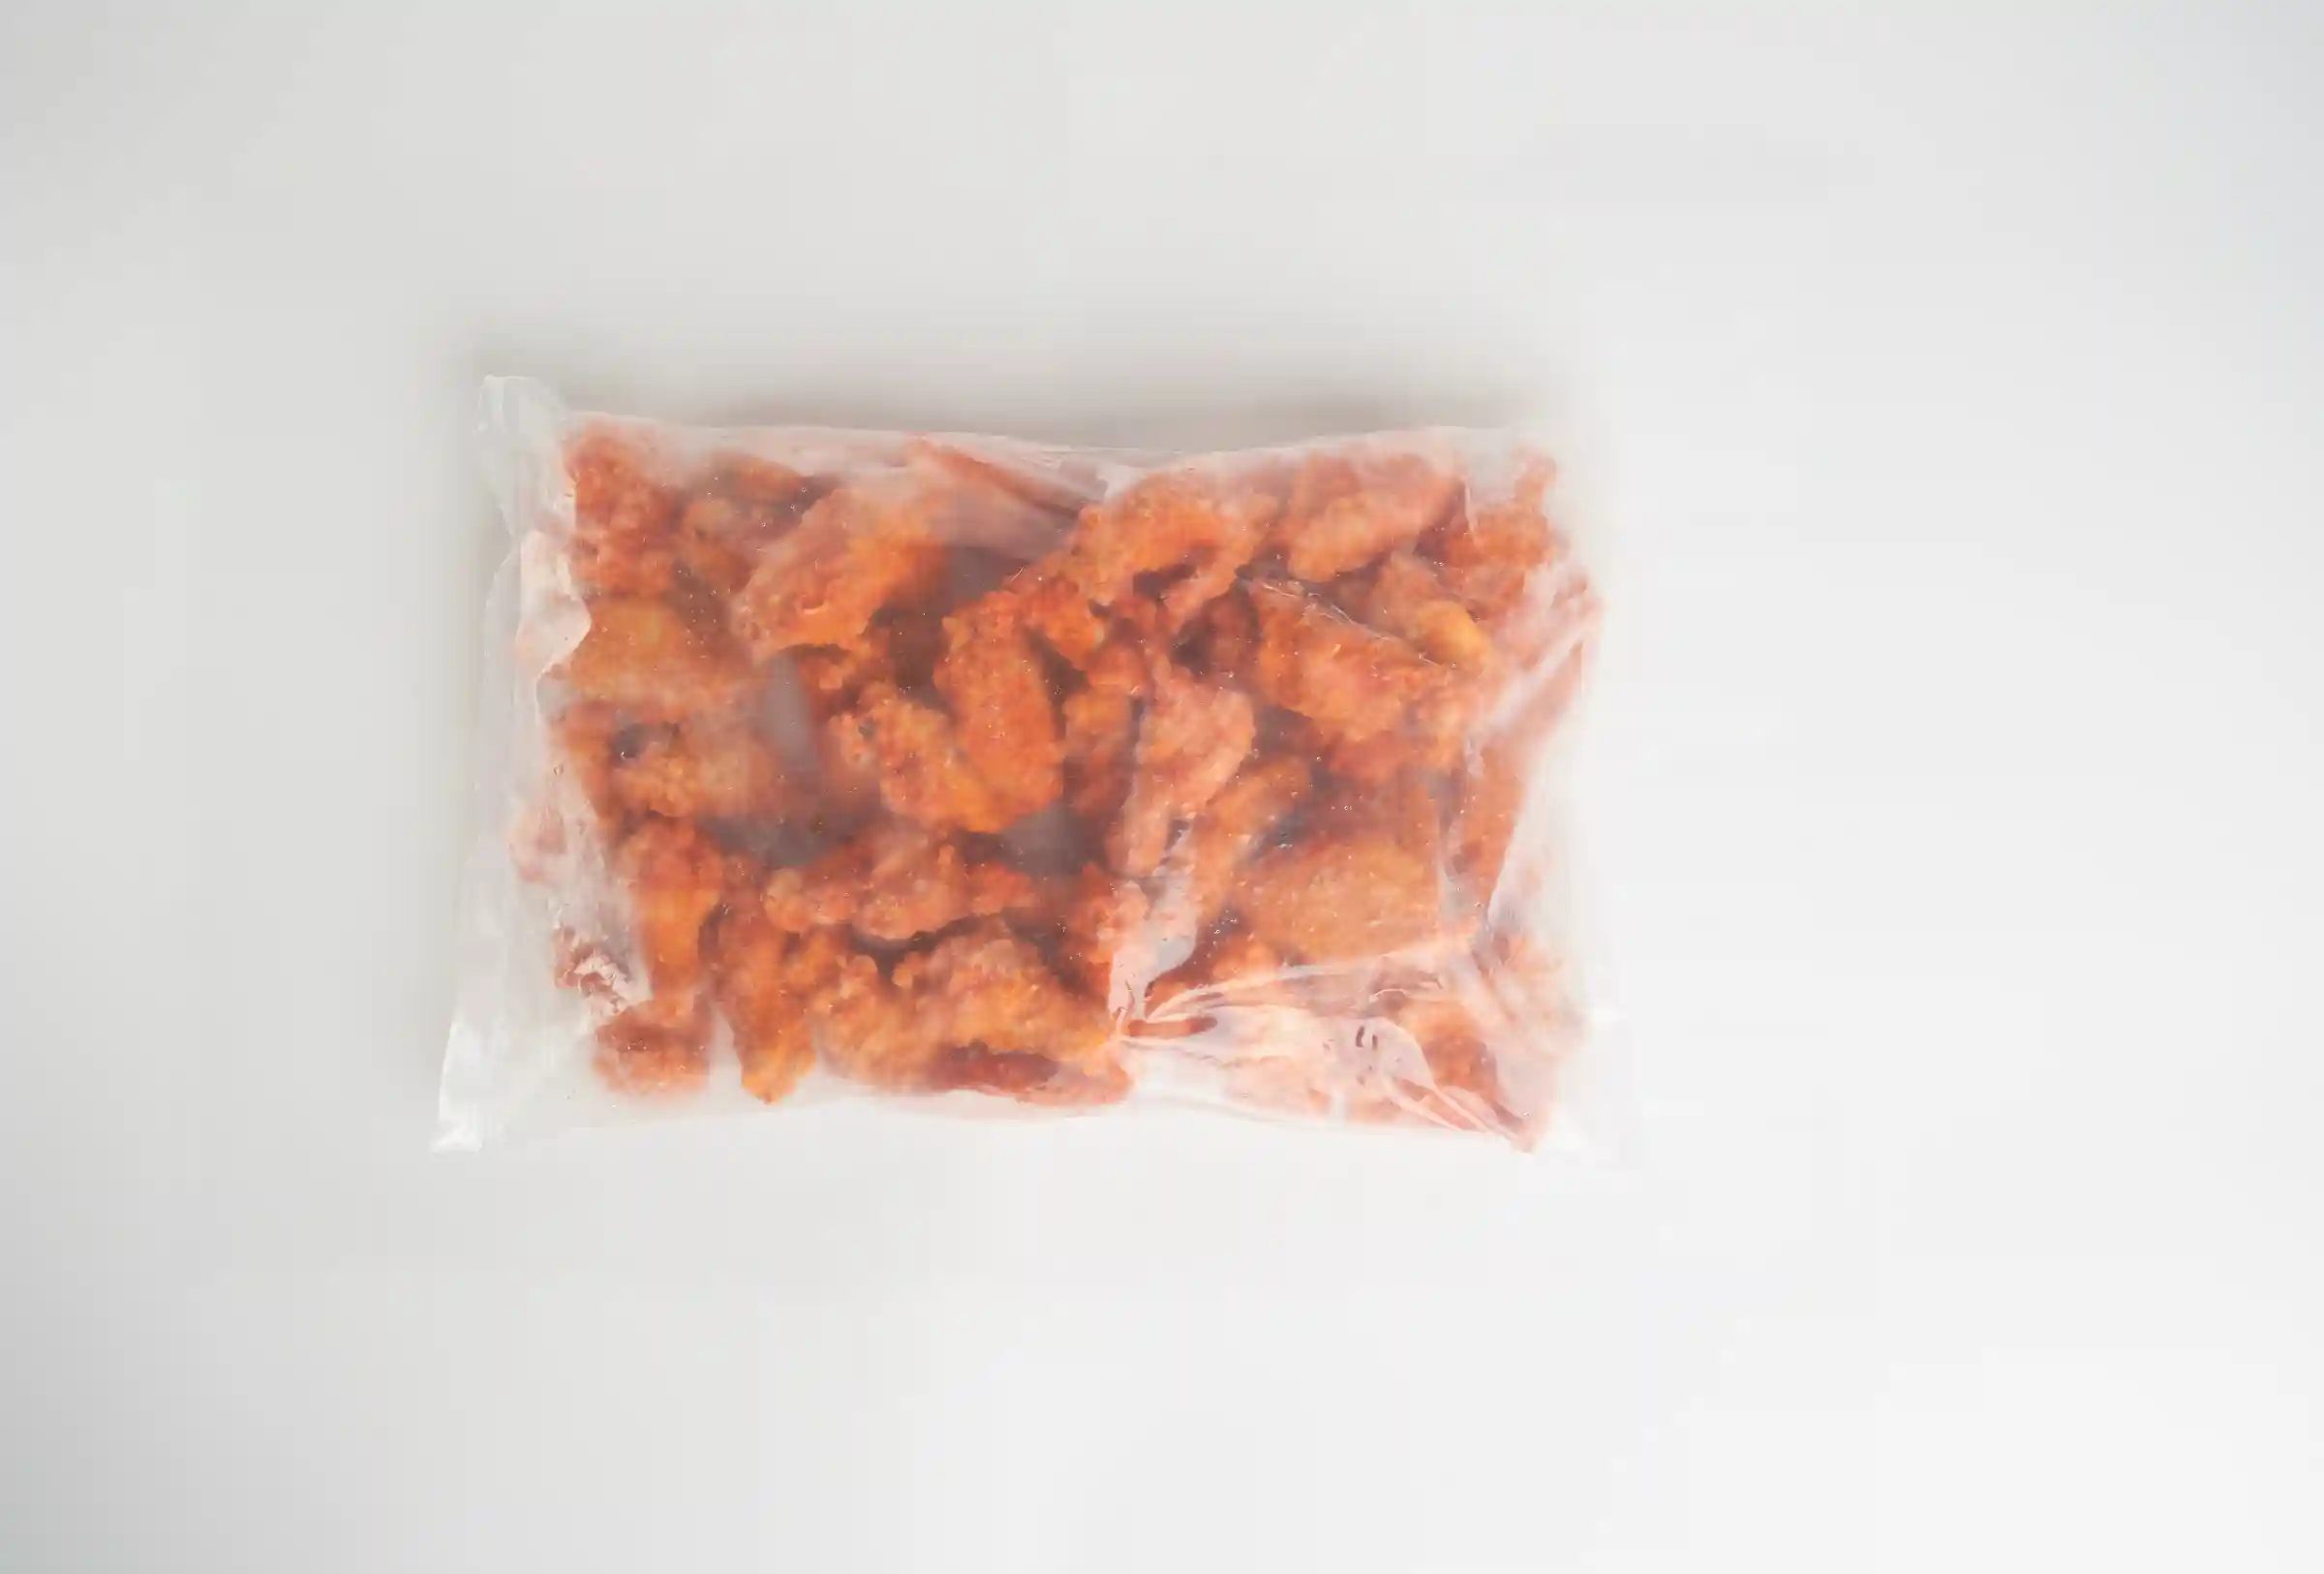 Tyson Red Label® Fully Cooked Breaded Authentically Crispy Spicy Bone-In Chicken Wing Sections, Smedium_image_21